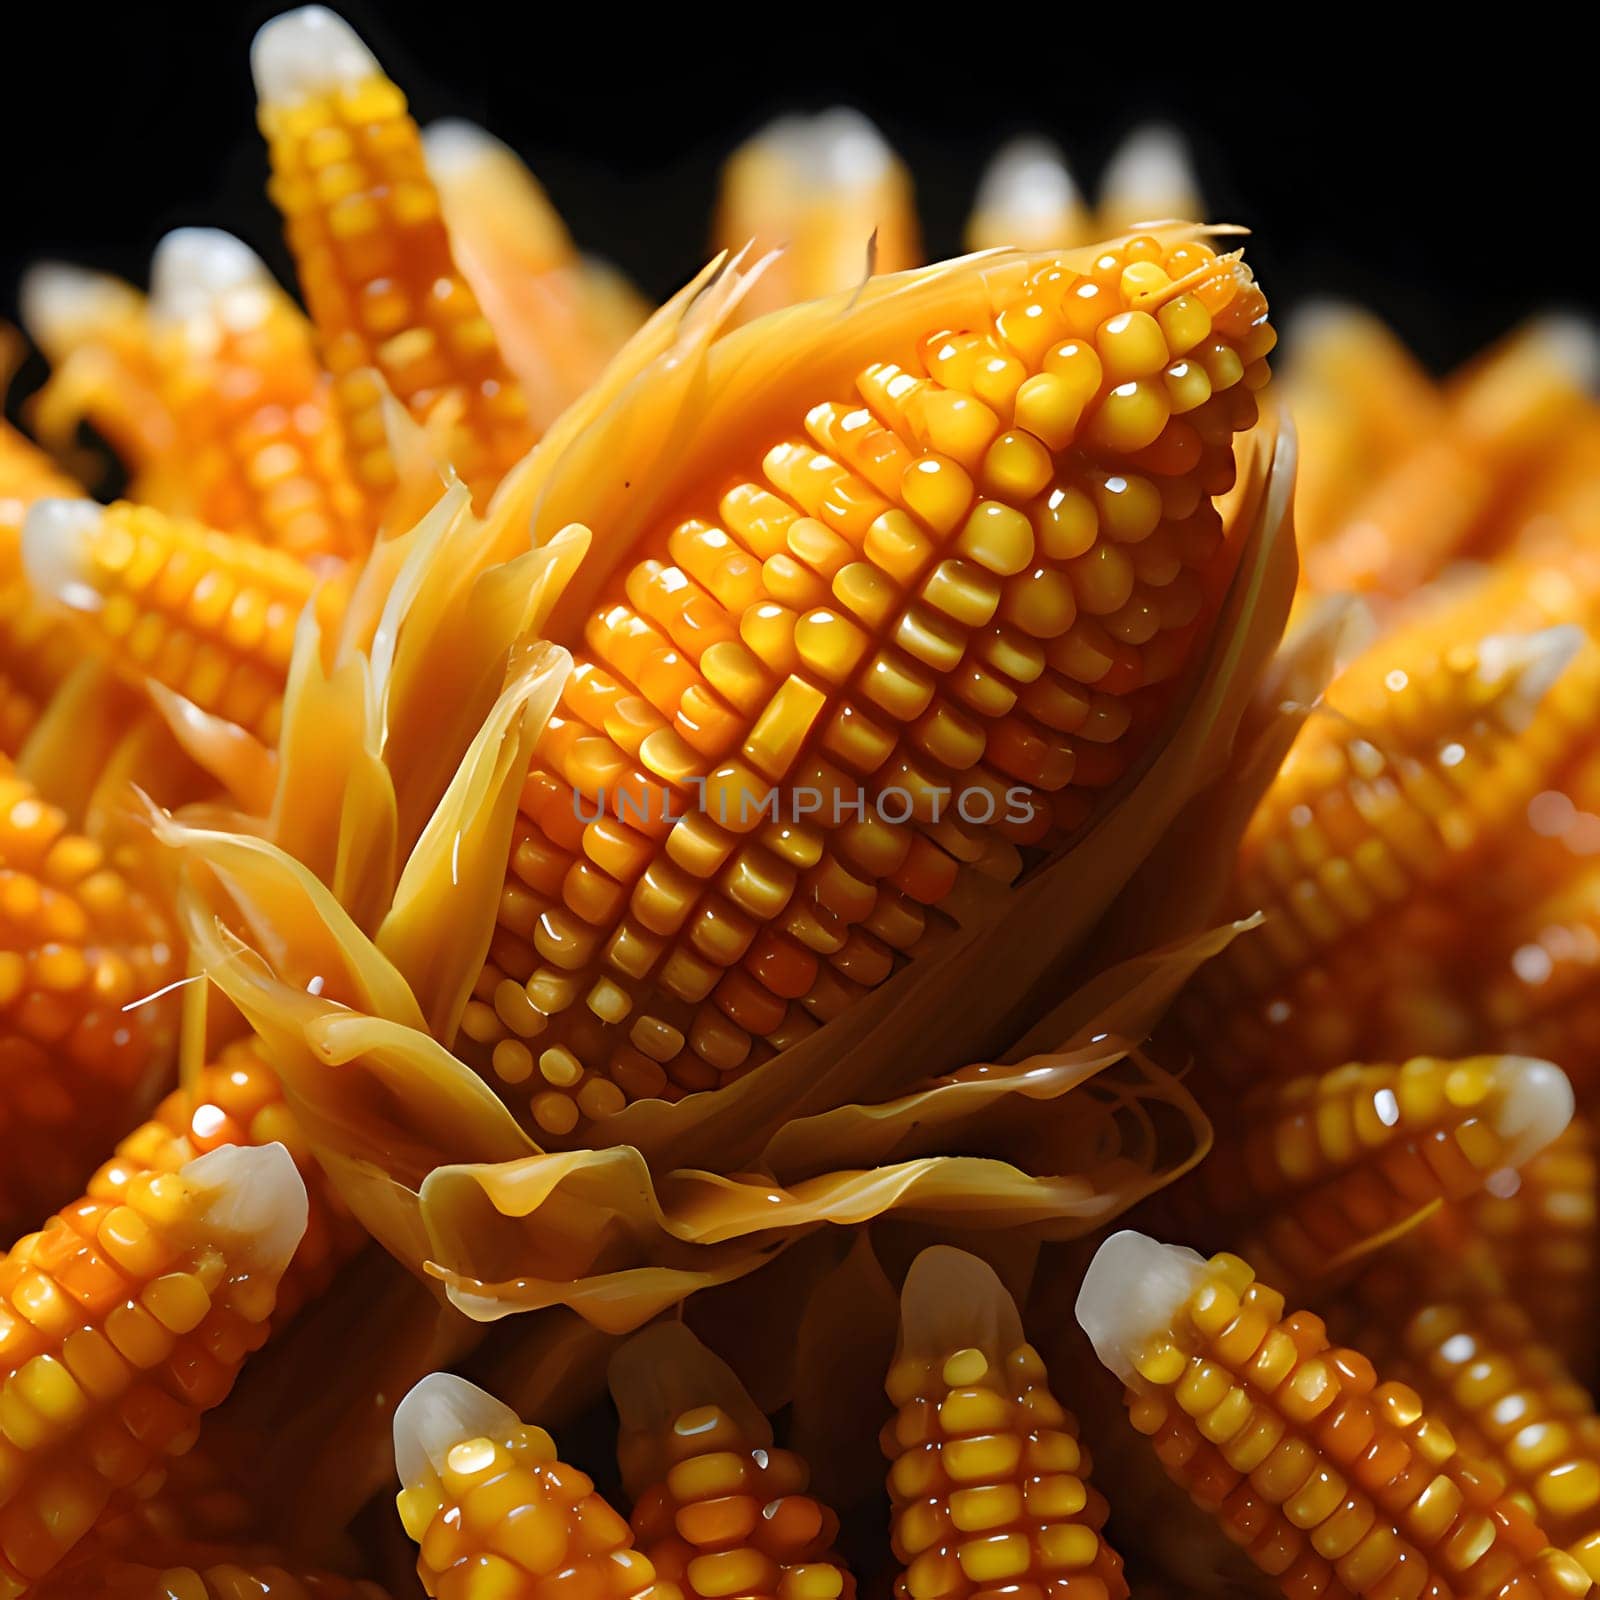 Tiny cobs of corn in sauce. Corn as a dish of thanksgiving for the harvest. An atmosphere of joy and celebration.